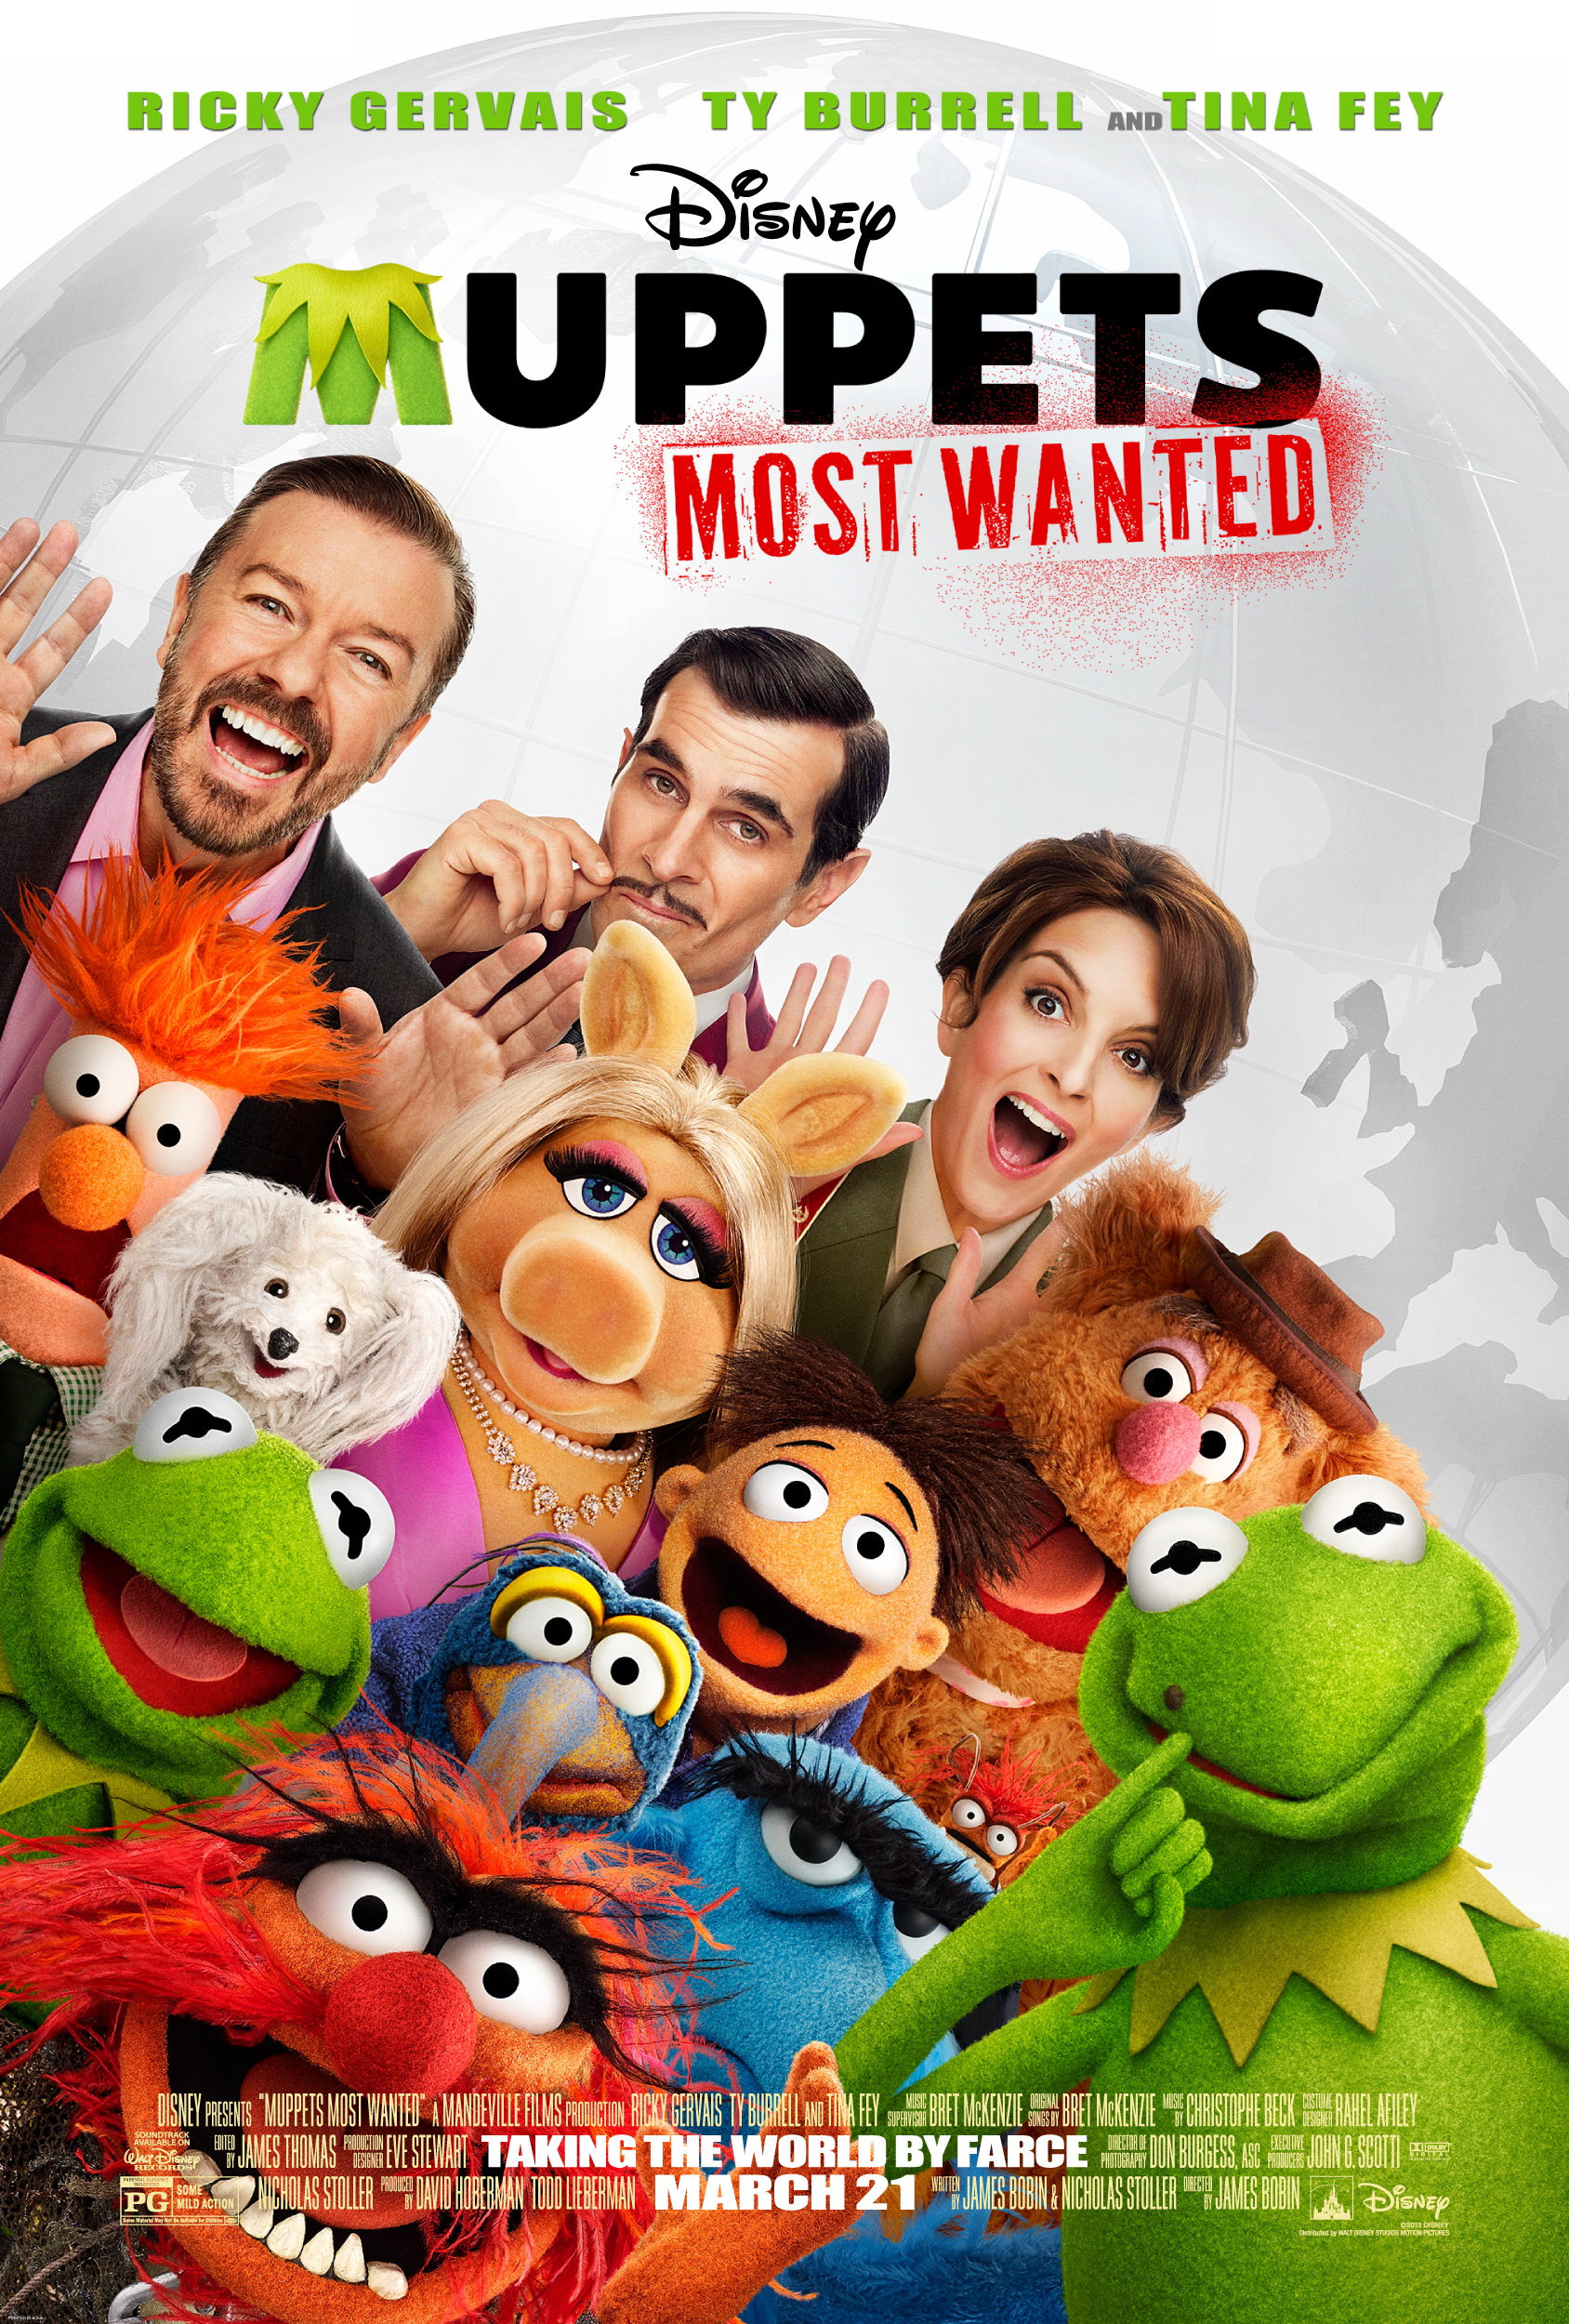 Muppets Most Wanted-Official Poster Banner PROMO POSTER-31OUTUBRO2013